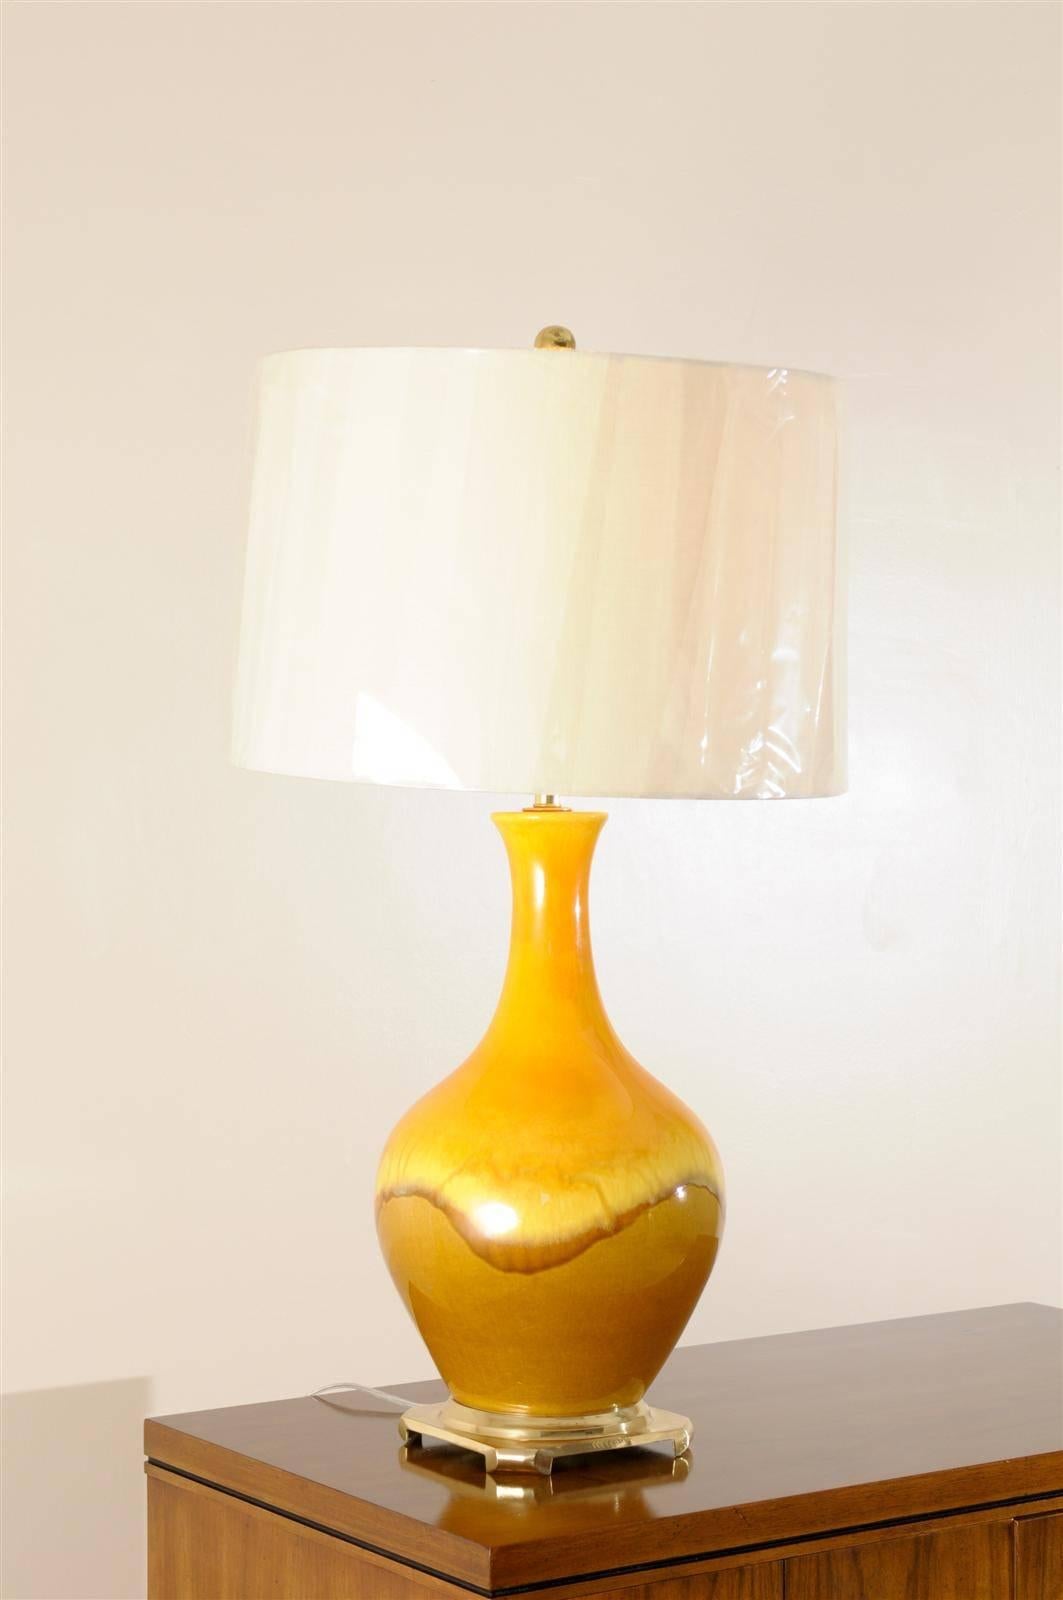 These magnificent lamps have been professionally restored and are shipped as photographed and described, complete with new shades, harps and finials.

A fabulous pair of large-scale vintage ceramic and brass lamps, circa 1970s. The yellow ochre and